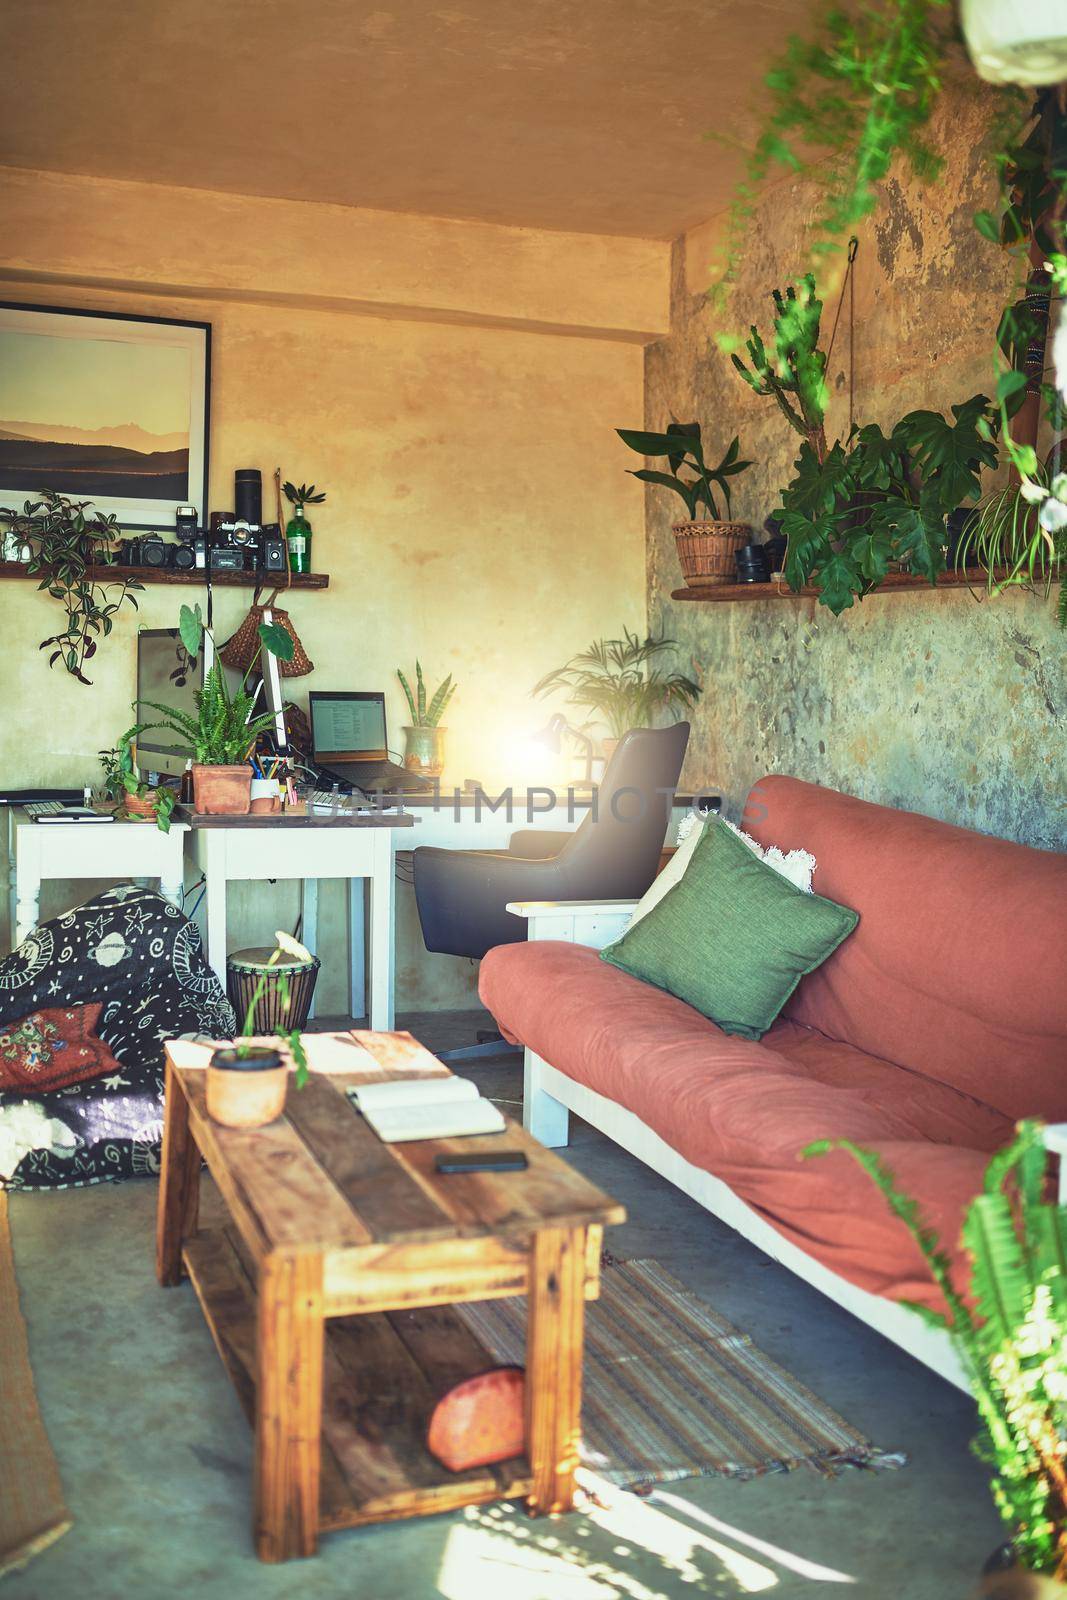 Still life shot of a workstation in the living room of a rustic apartment